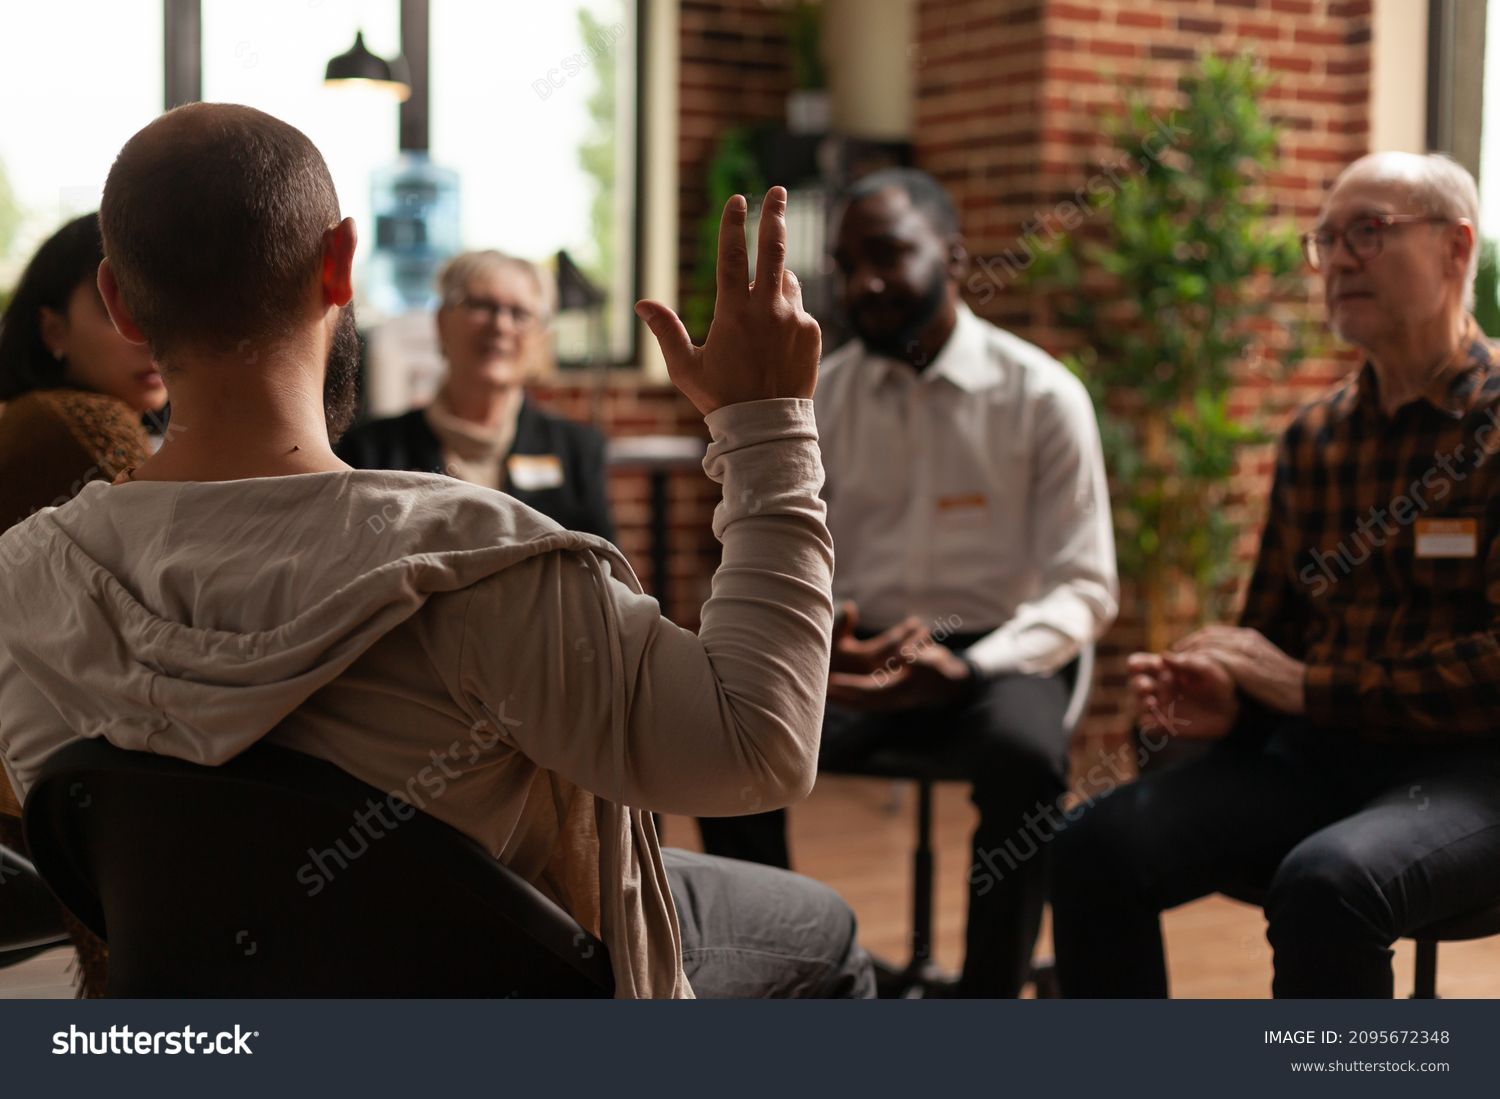 Man with addiction sharing health problems with group at aa meeting, talking to therapist. Alcoholic people having conversation about depression and rehabilitation at therapy session. #2095672348